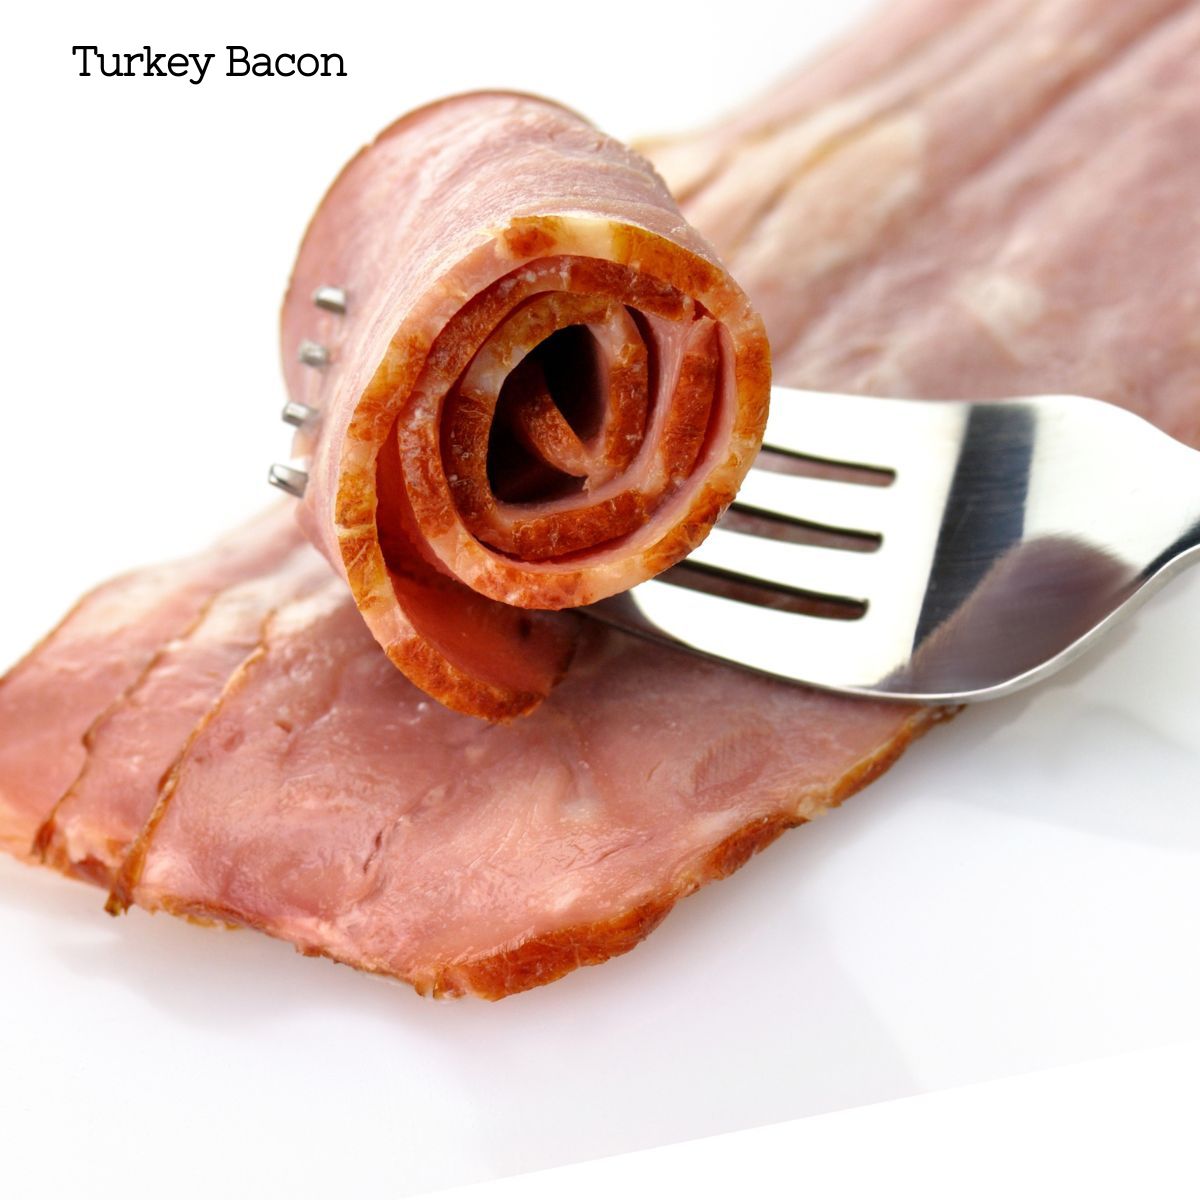 A stack of turkey bacon slices with one rolled up with a fork through it.